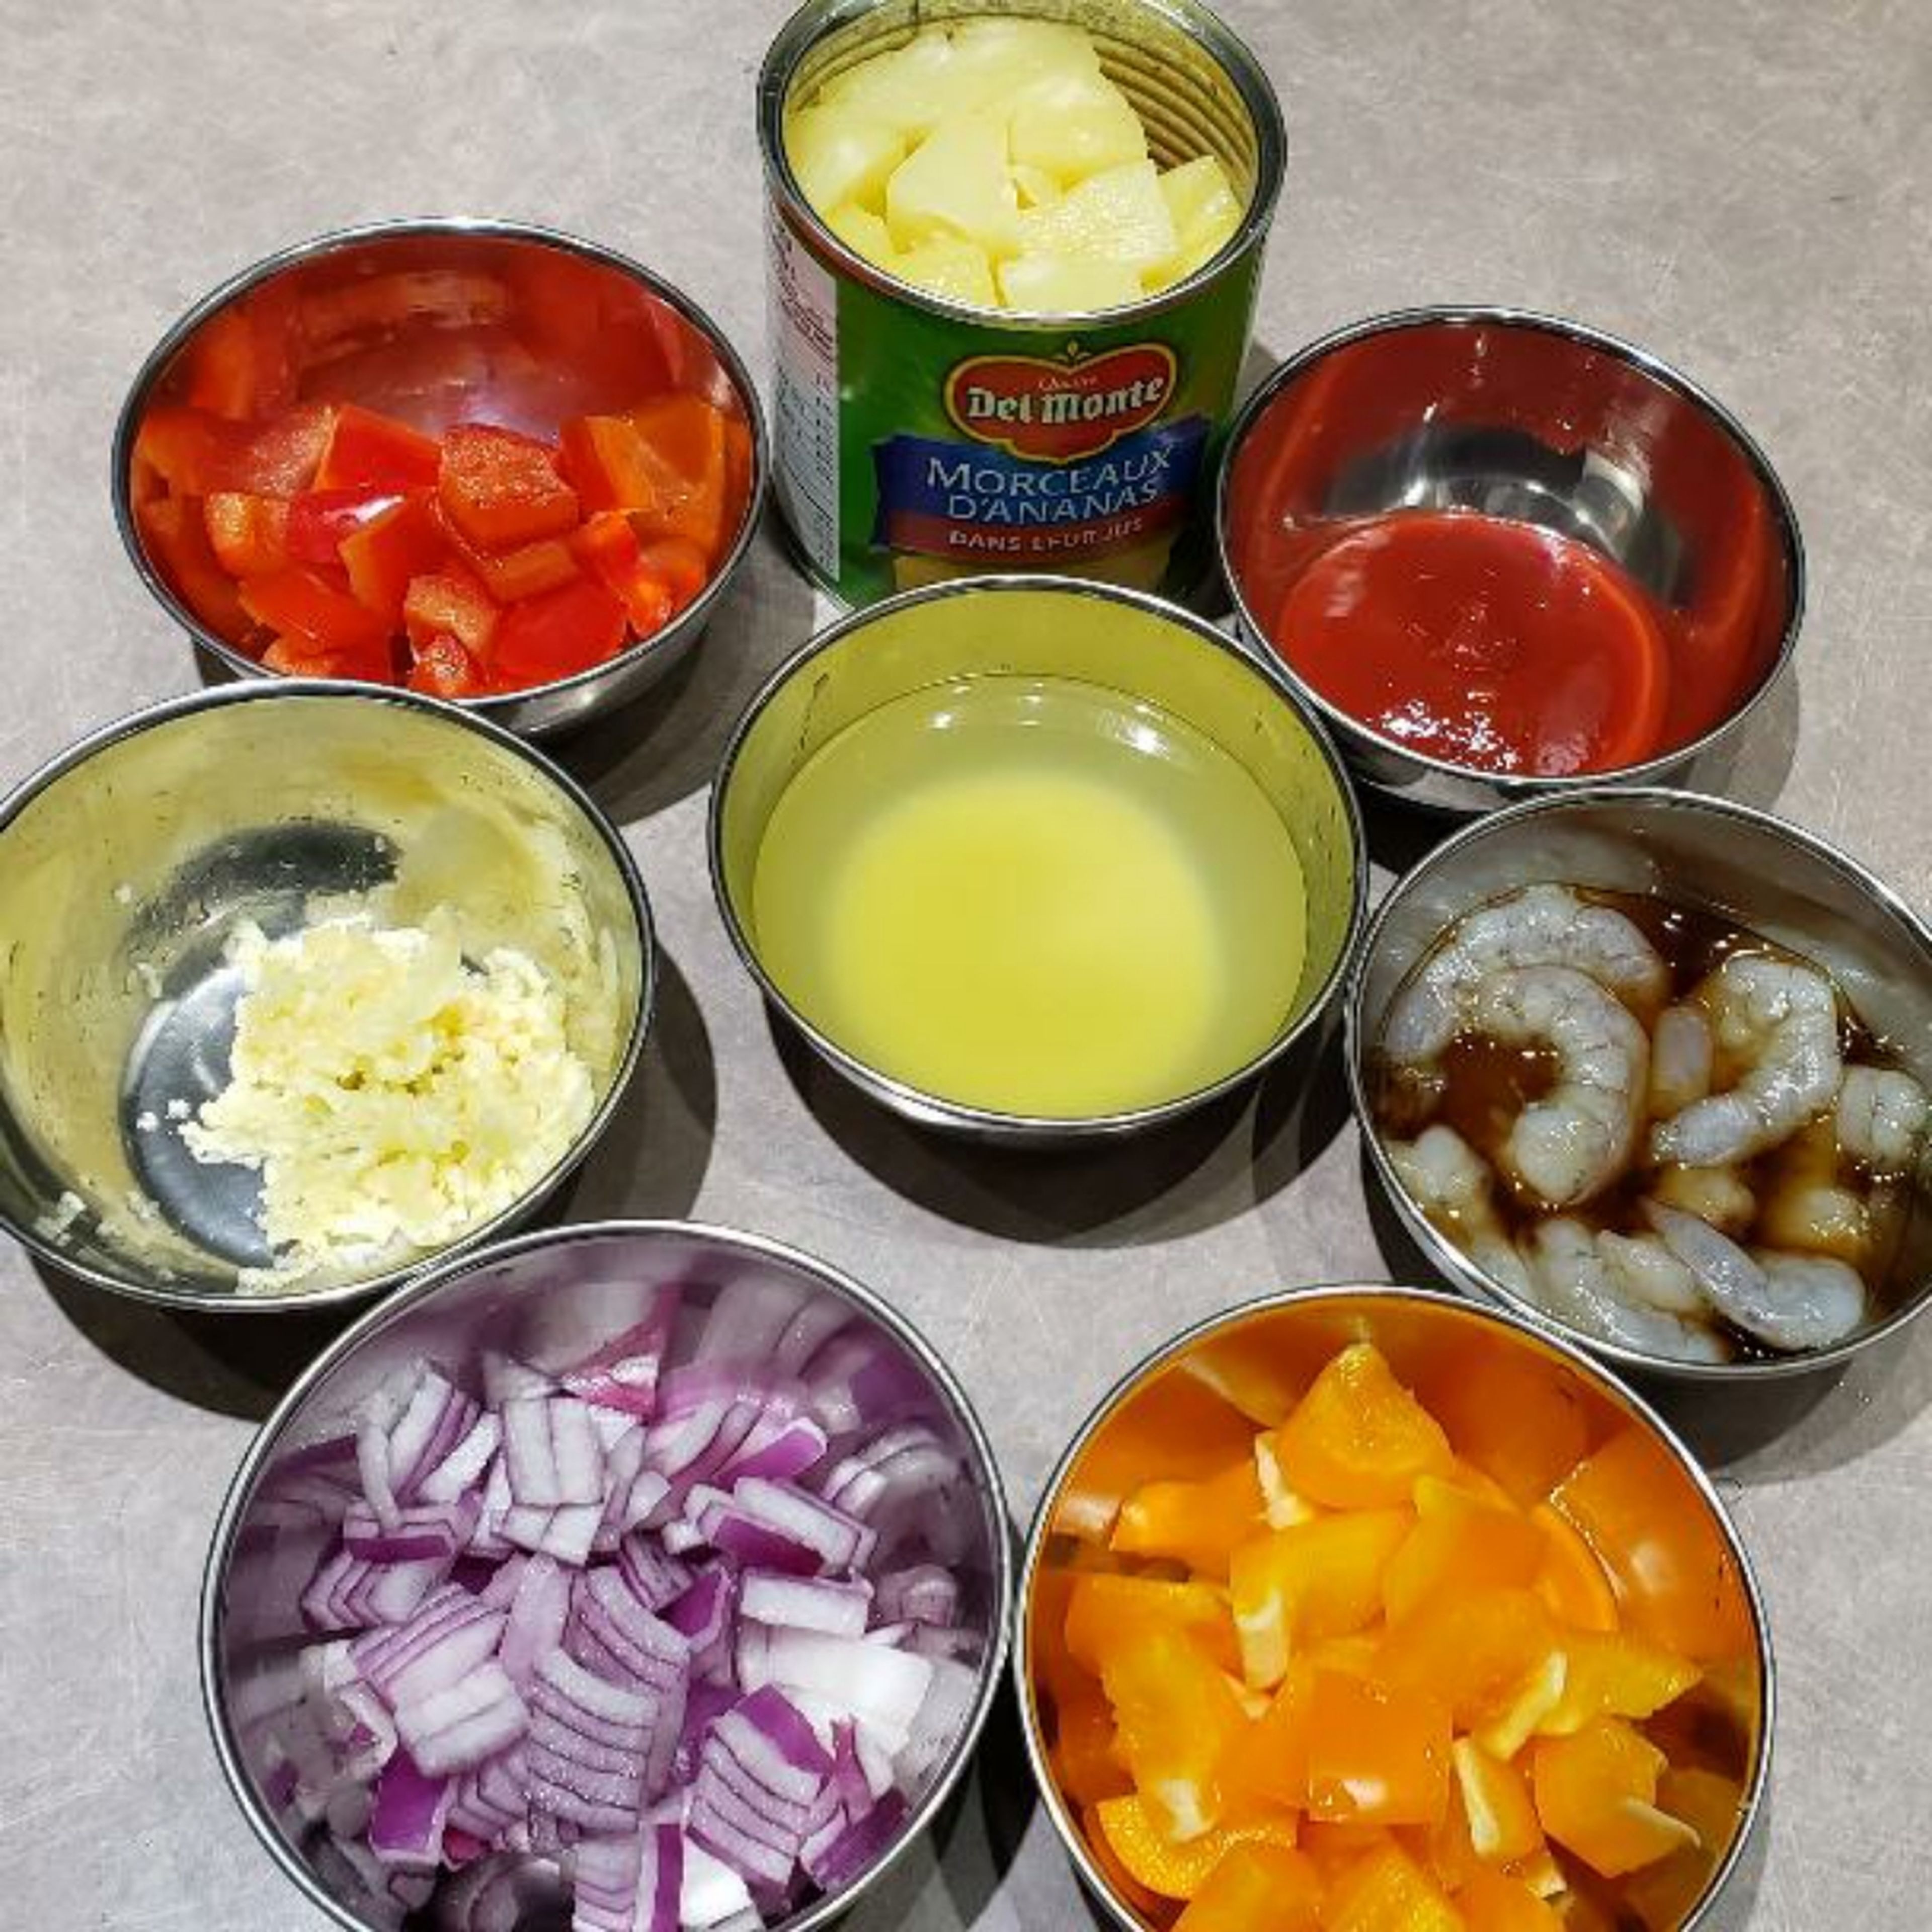 1, chopped red bell peppers, orange bell pepper and red onions into cube size.